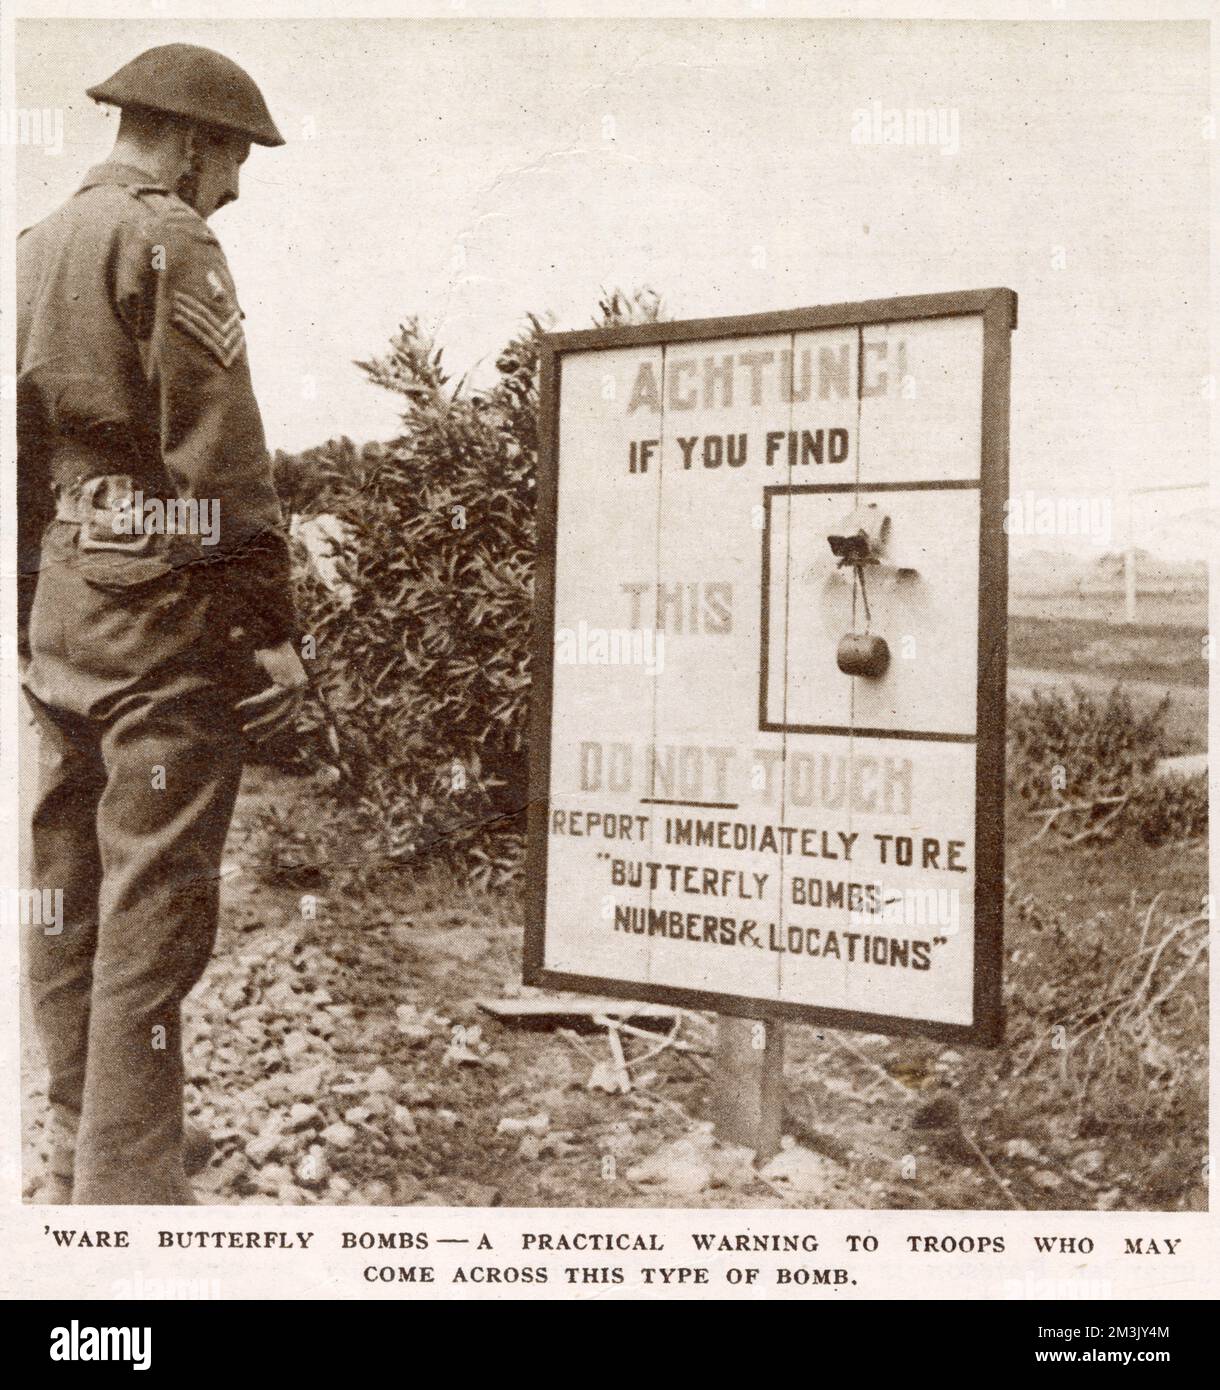 A British sargeant looking at a warning notice, regarding 'Butterfly' anti-personnel mines in Italy, during the Second World War.  The warning instructs anyone who finds one of these bombs not to touch it and to report it to the Royal Engineers. Stock Photo